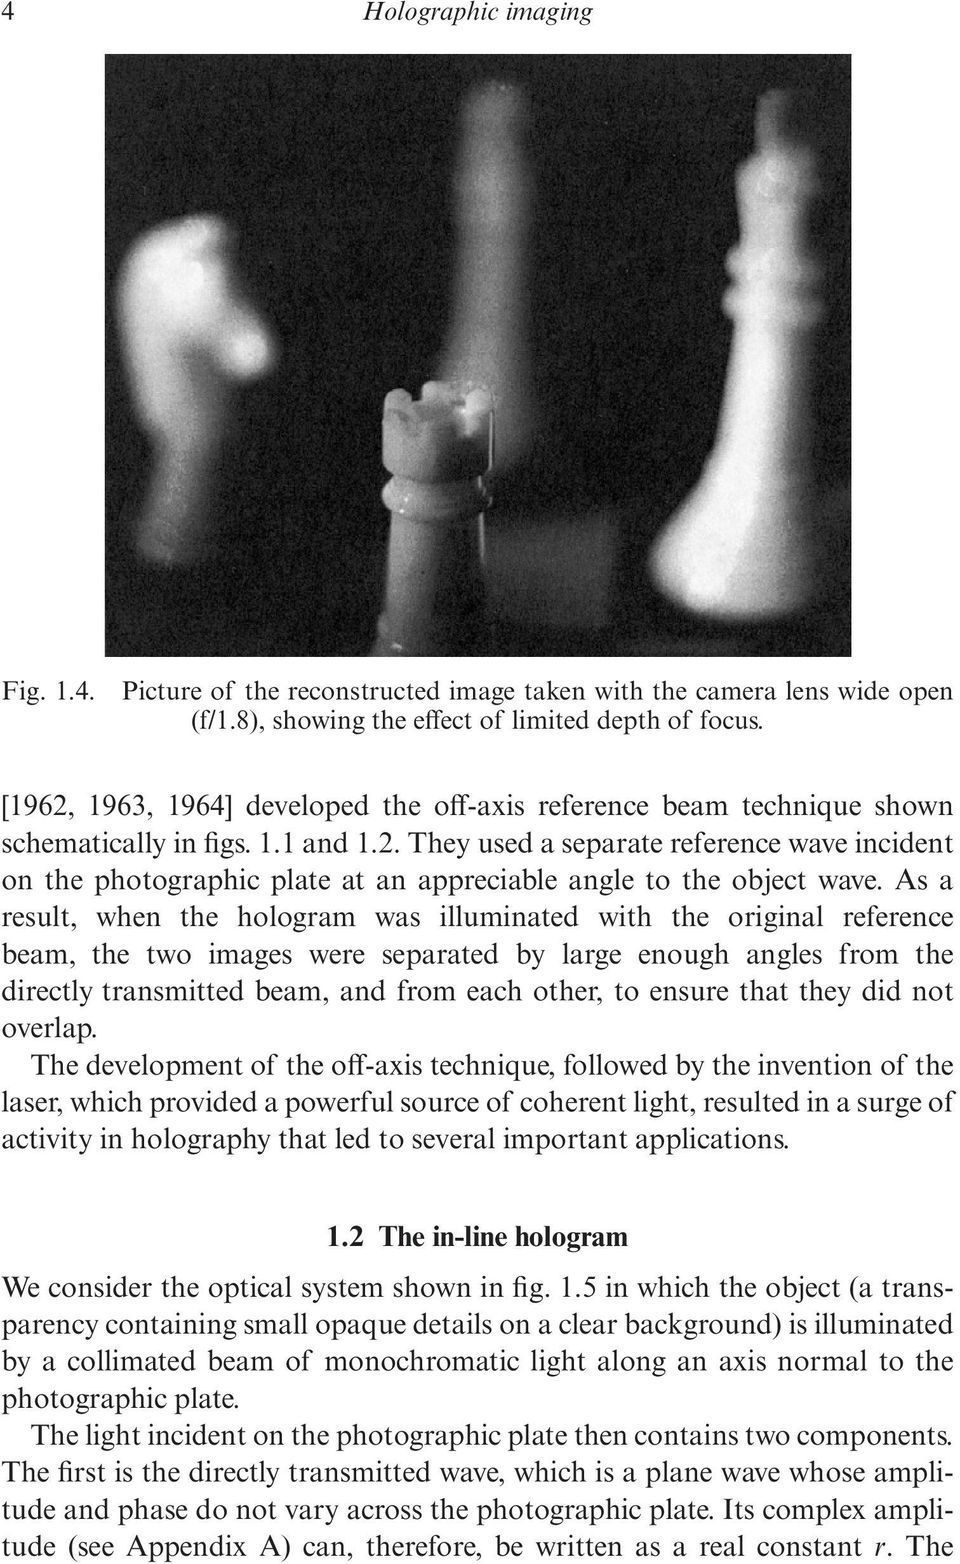 As a result, when the hologram was illuminated with the original reference beam, the two images were separated by large enough angles from the directly transmitted beam, and from each other, to